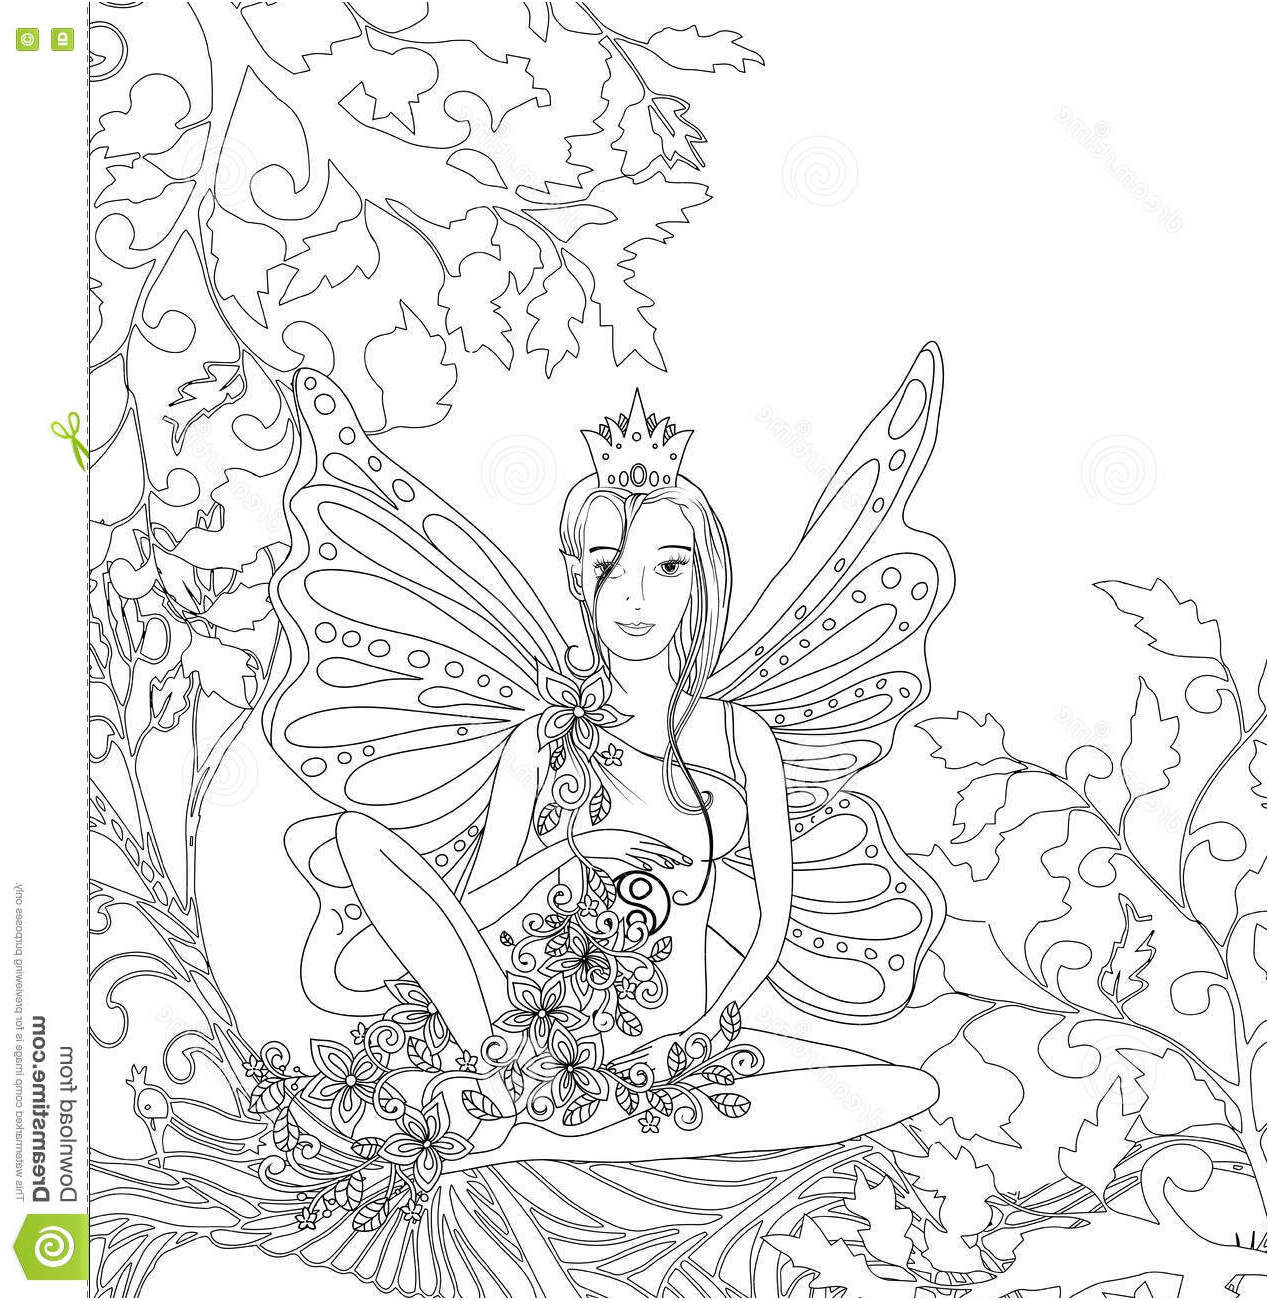 stock photo adult coloring book page isolated fairy lady butterfly wings zentangle style art black white monochrome graphic can be image